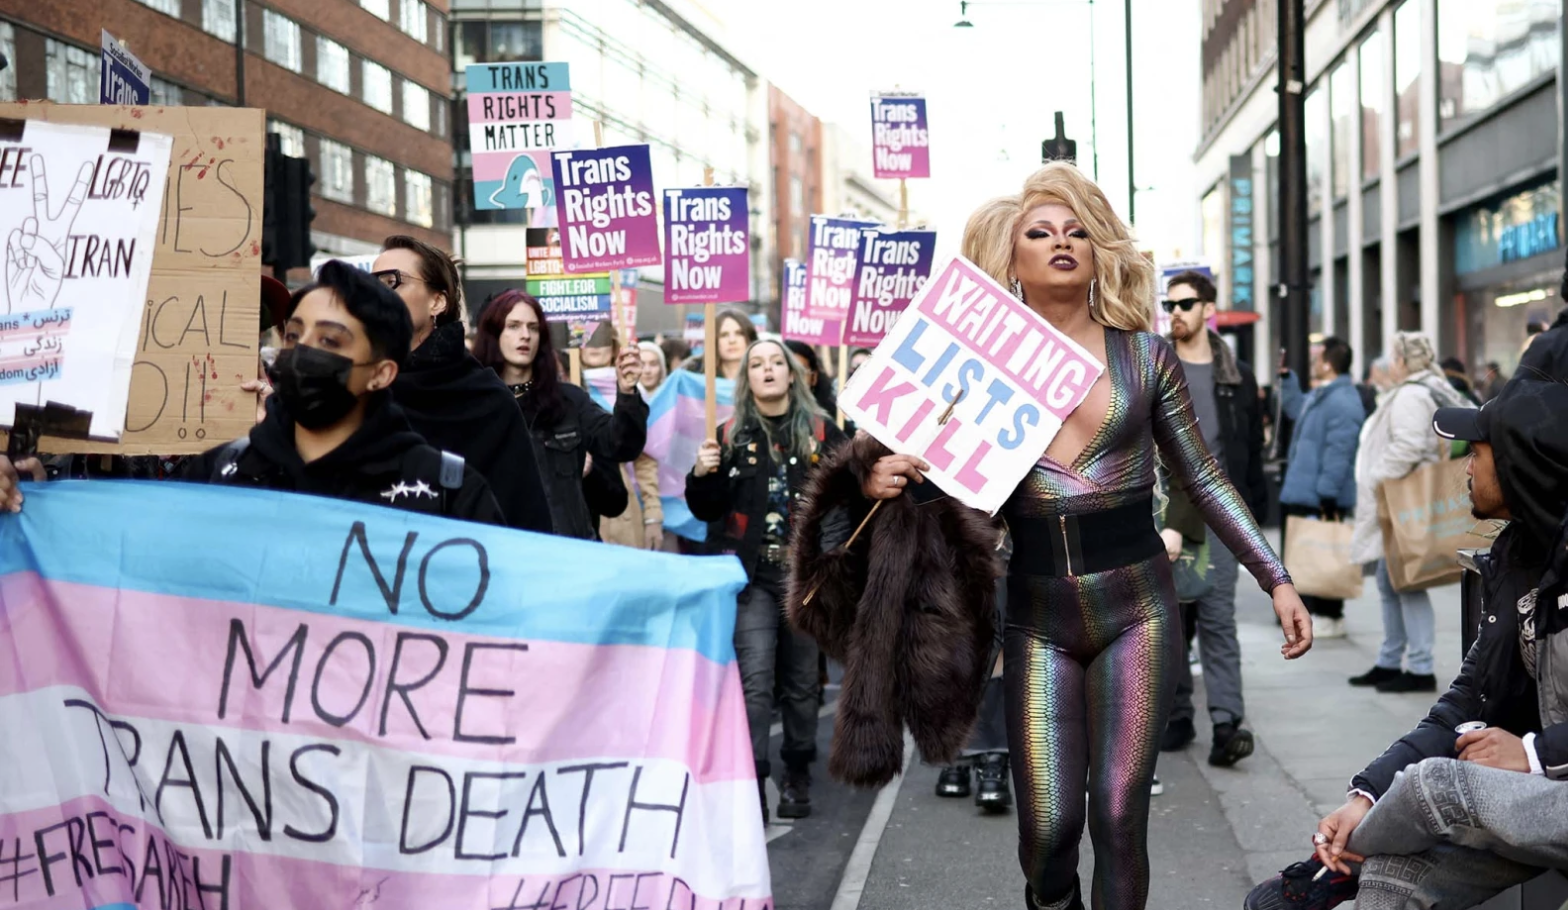 Transgender rights supporters protest in London